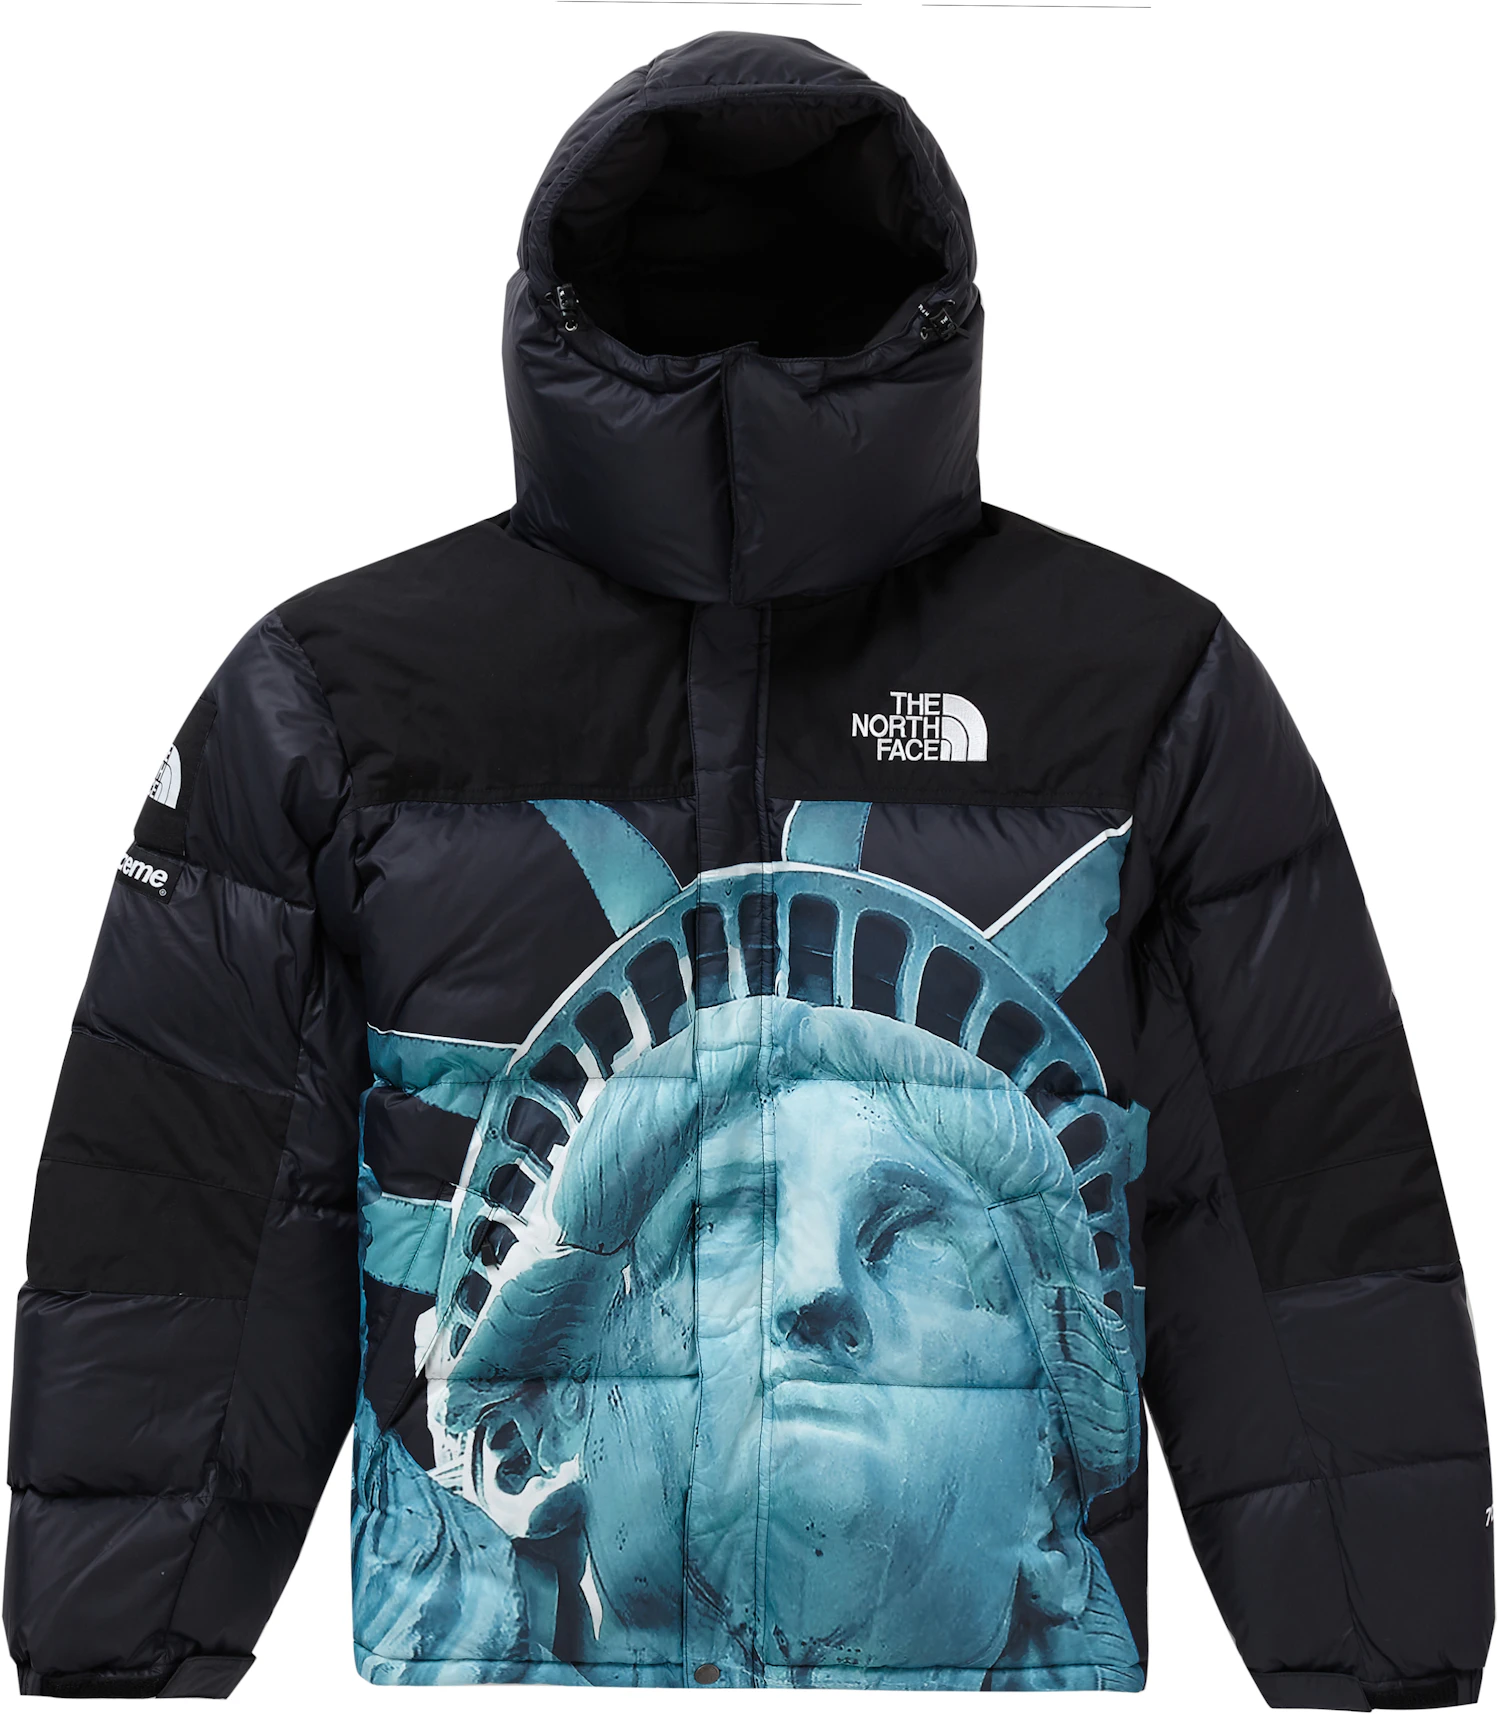 Supreme The North Face Statue of Liberty Jacket Black - FW19 - US